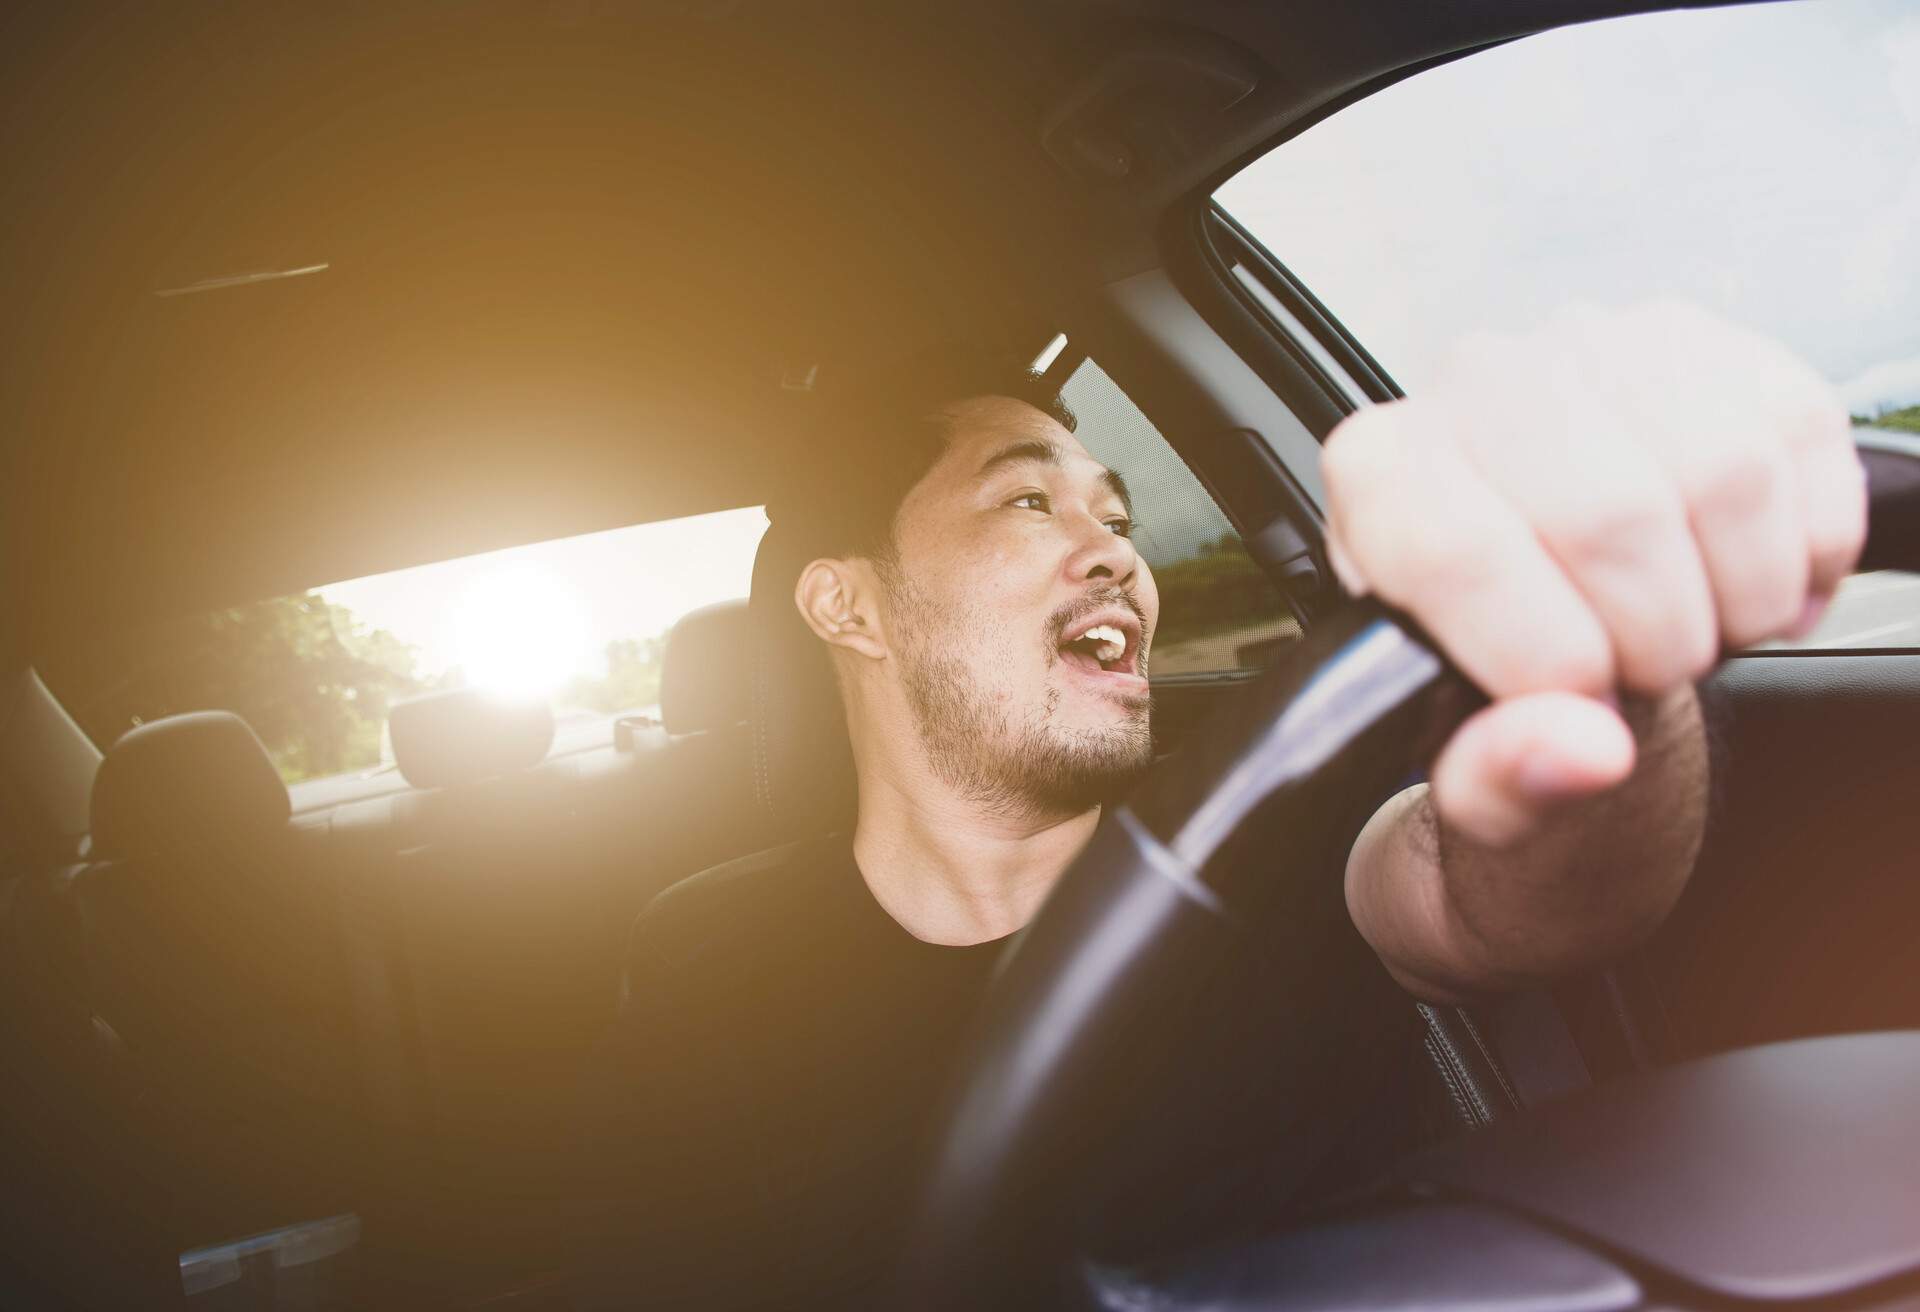 A man singing in the car while driving as the sun hits the rear windshield.